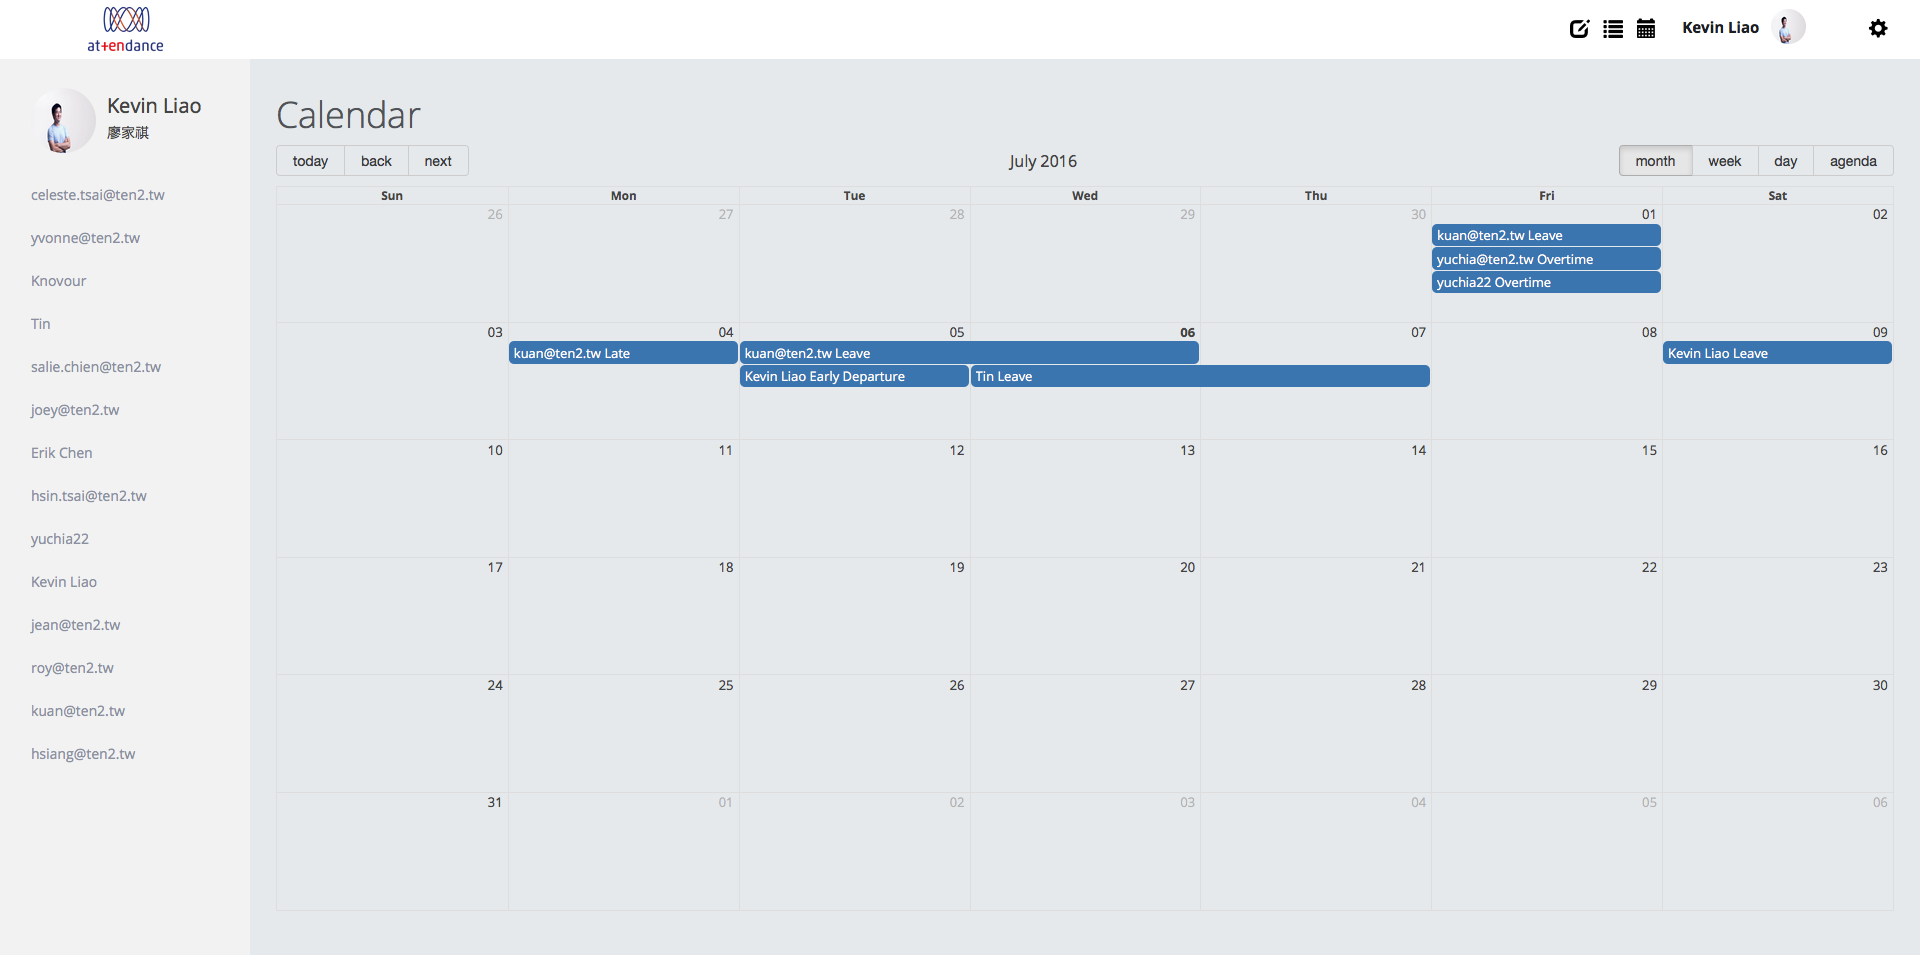 The homepage/calendar component